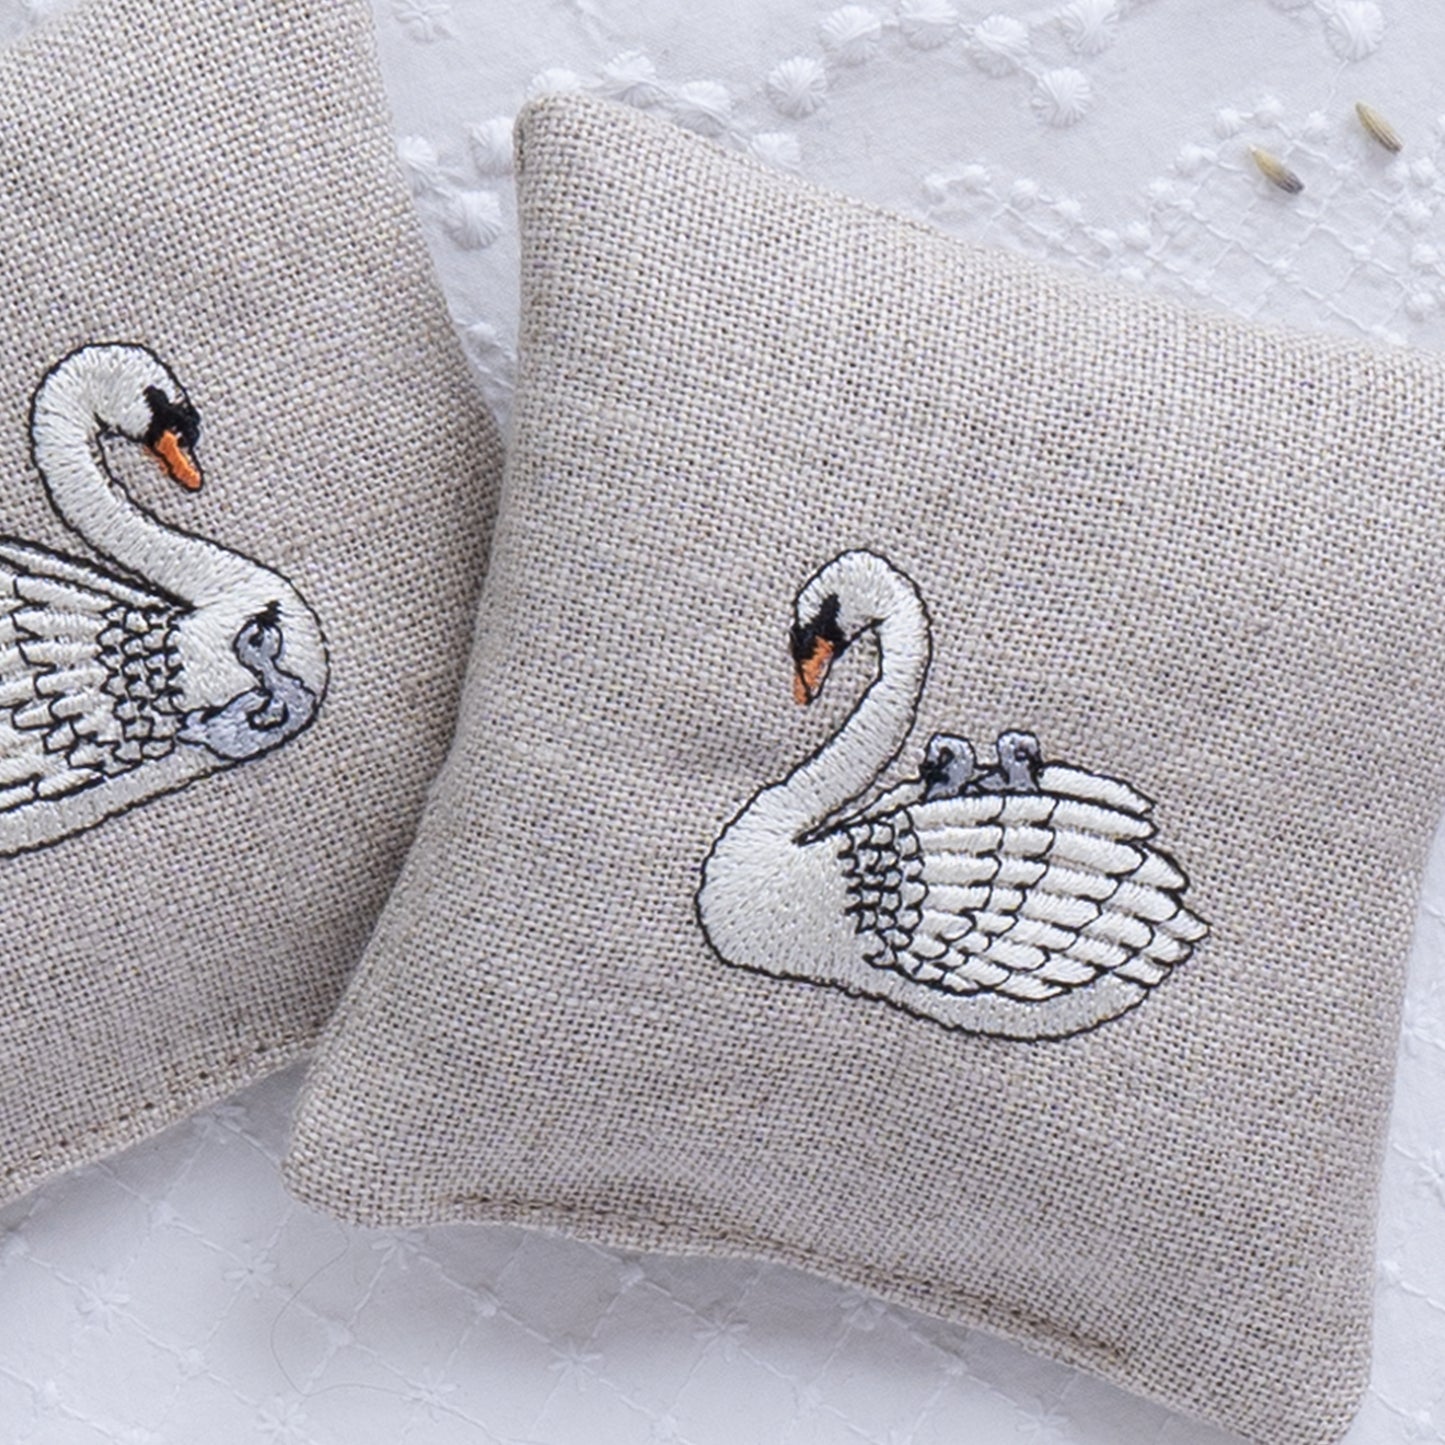 Embroidered Swan Lavender Sachets - Set of Two